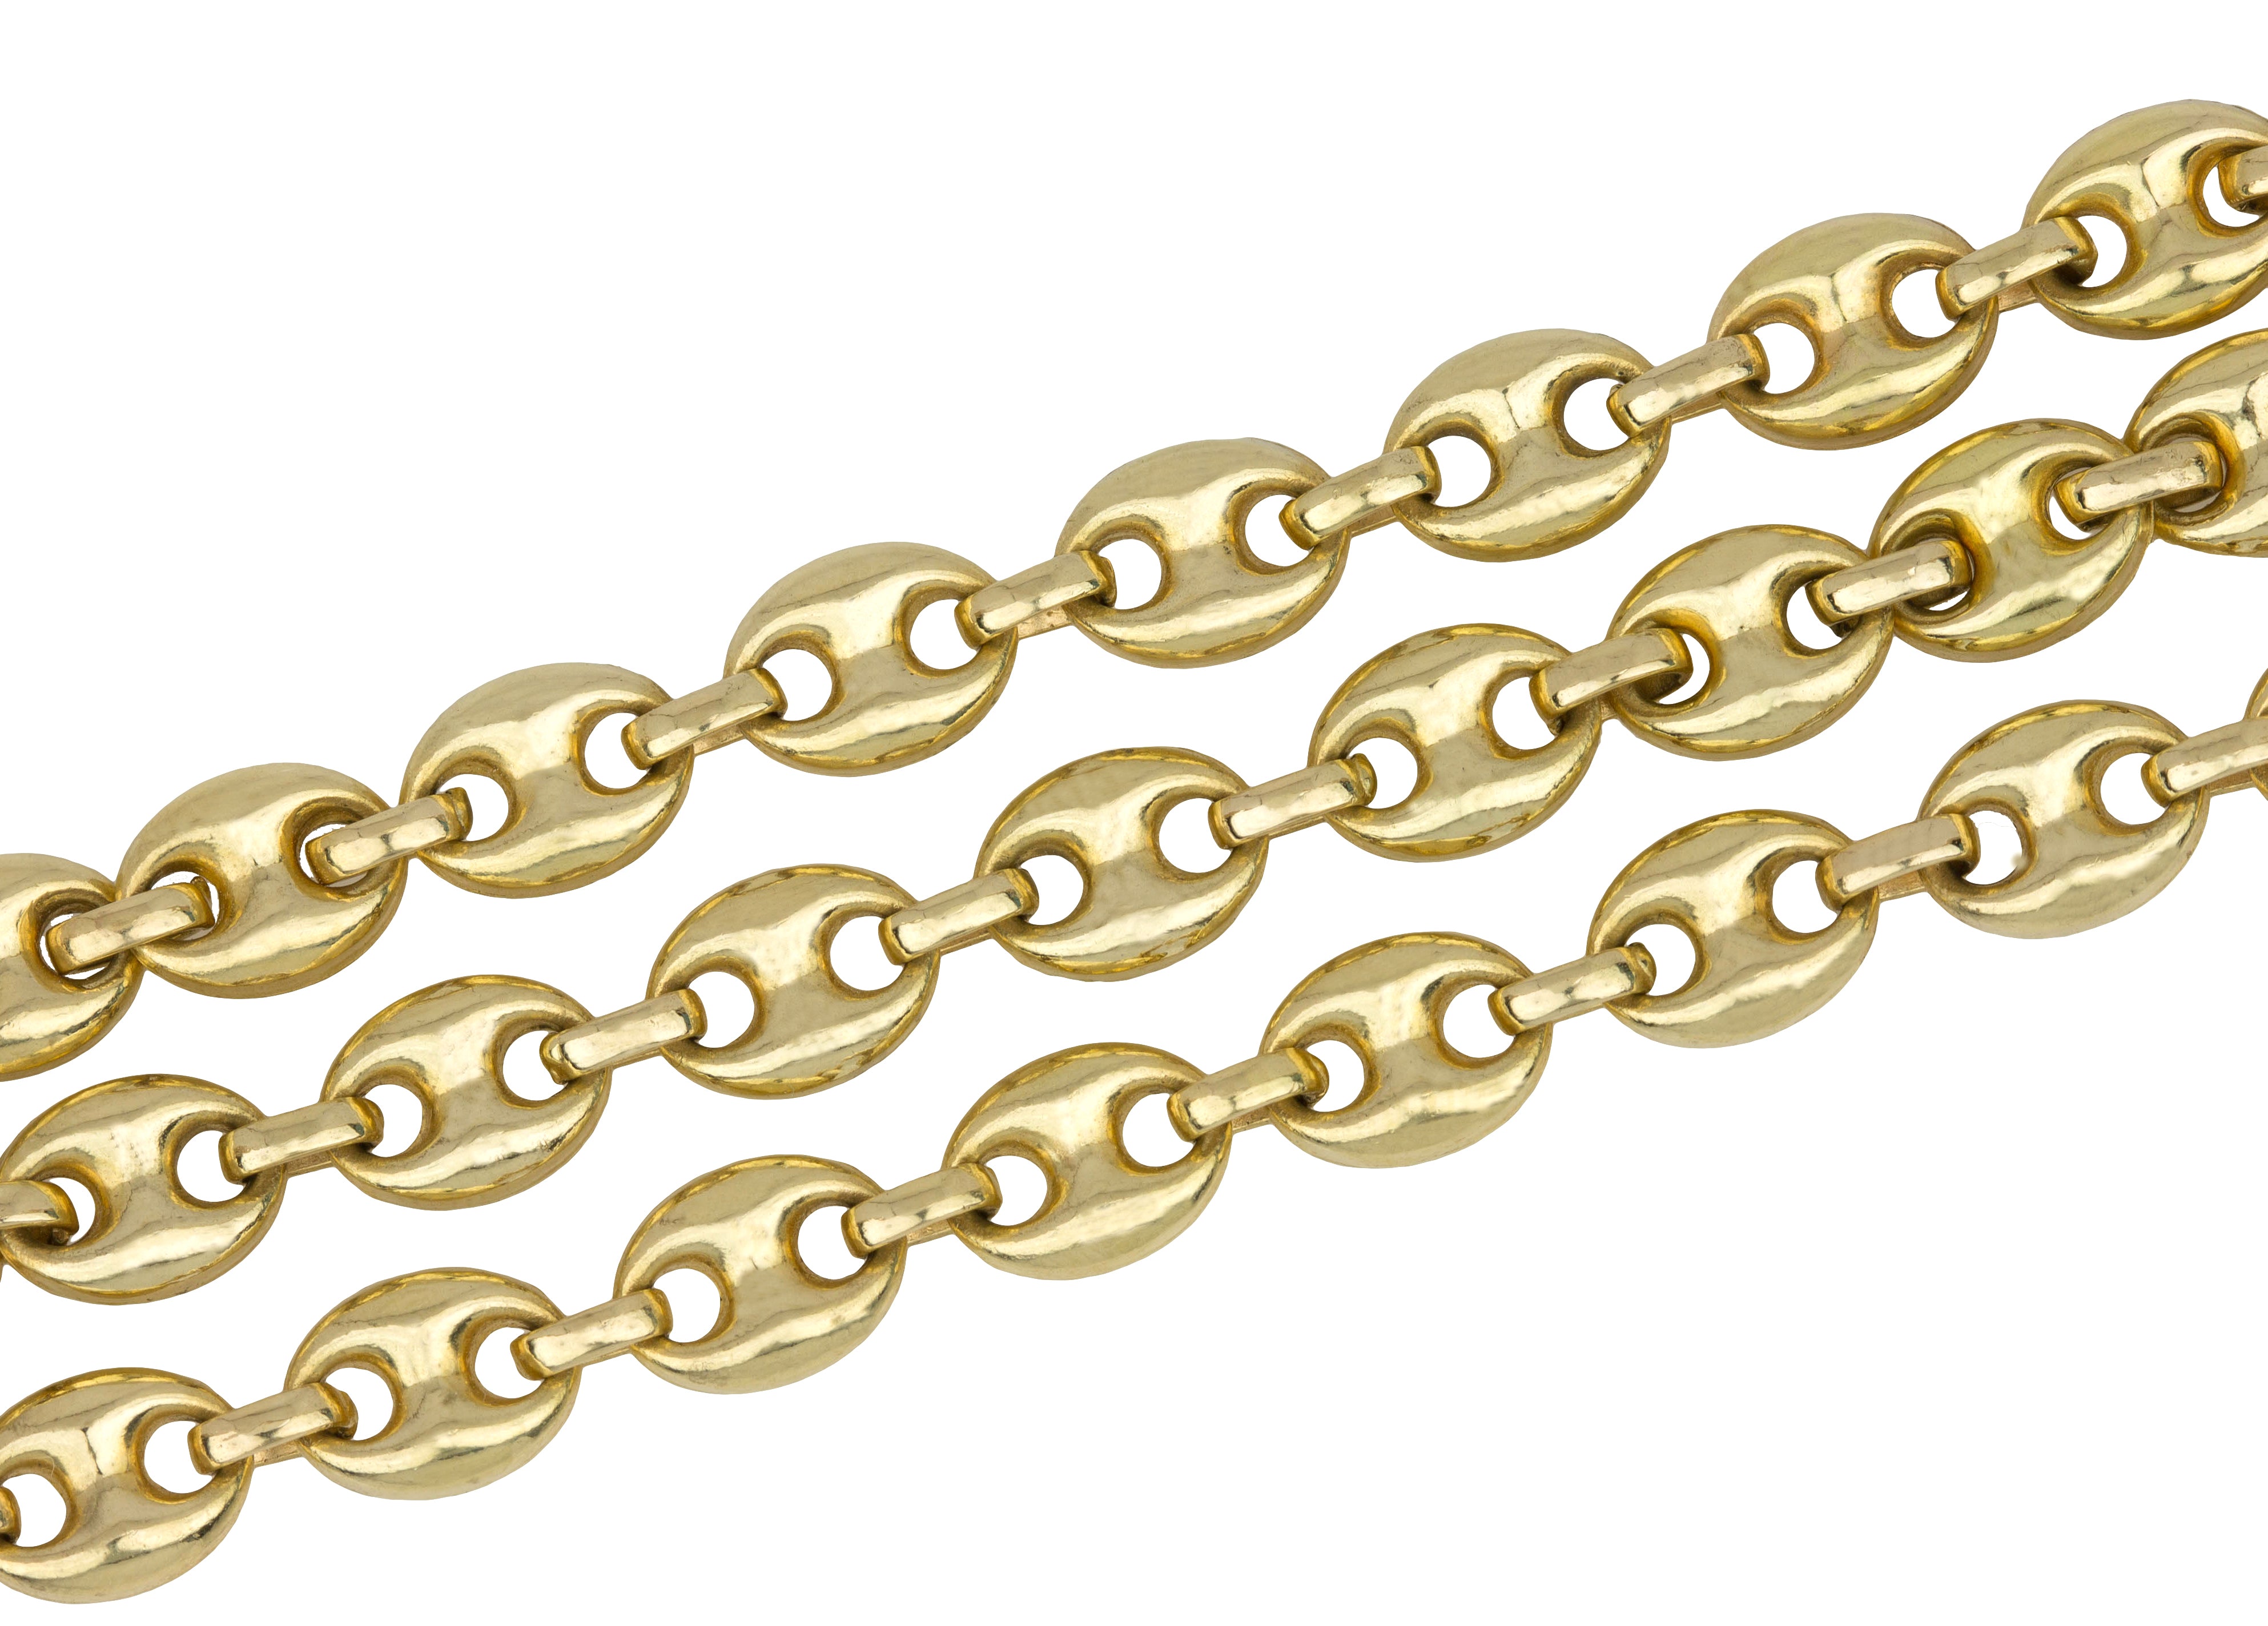 gucci link chain necklace